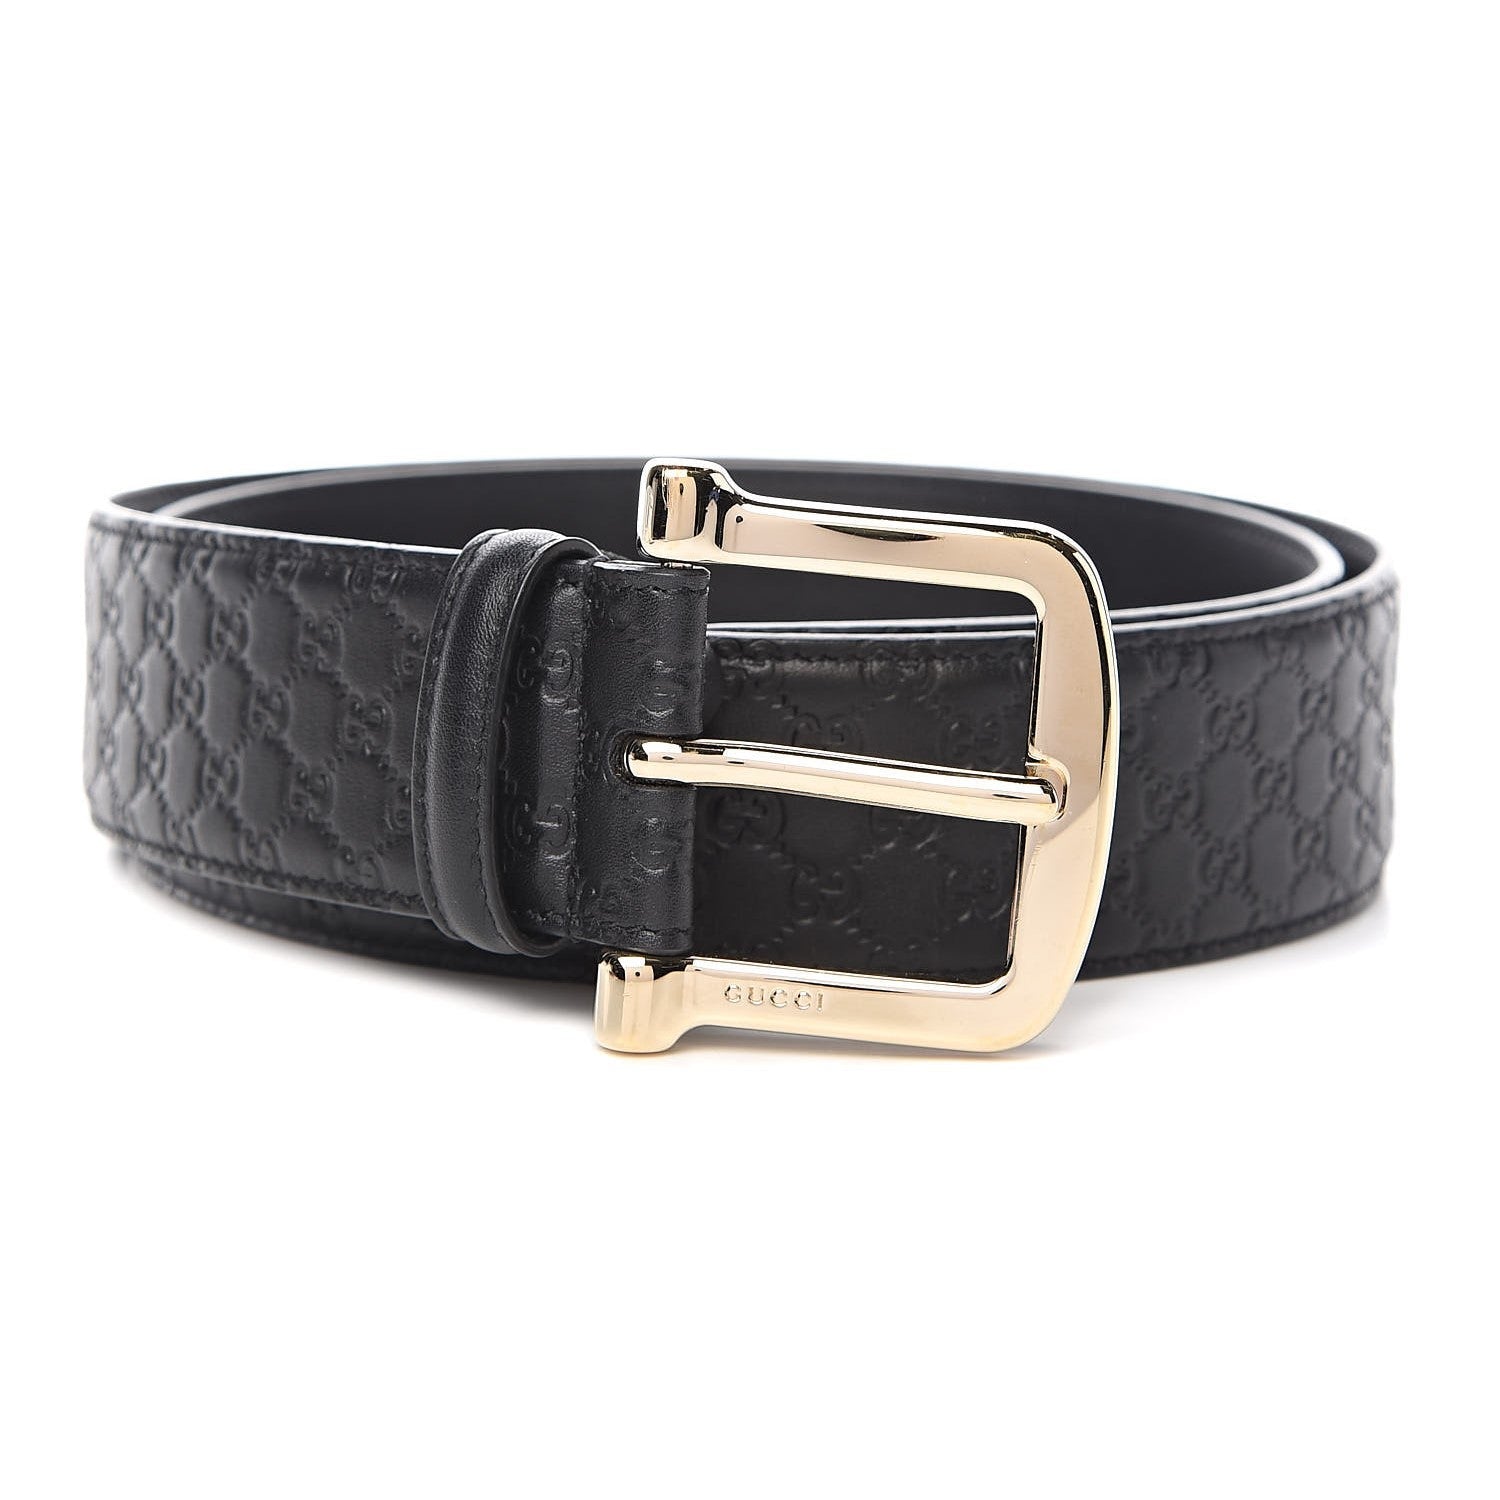 Gucci Microguccissima Black Leather Gold Buckle Belt 95/38 449716 at_Queen_Bee_of_Beverly_Hills